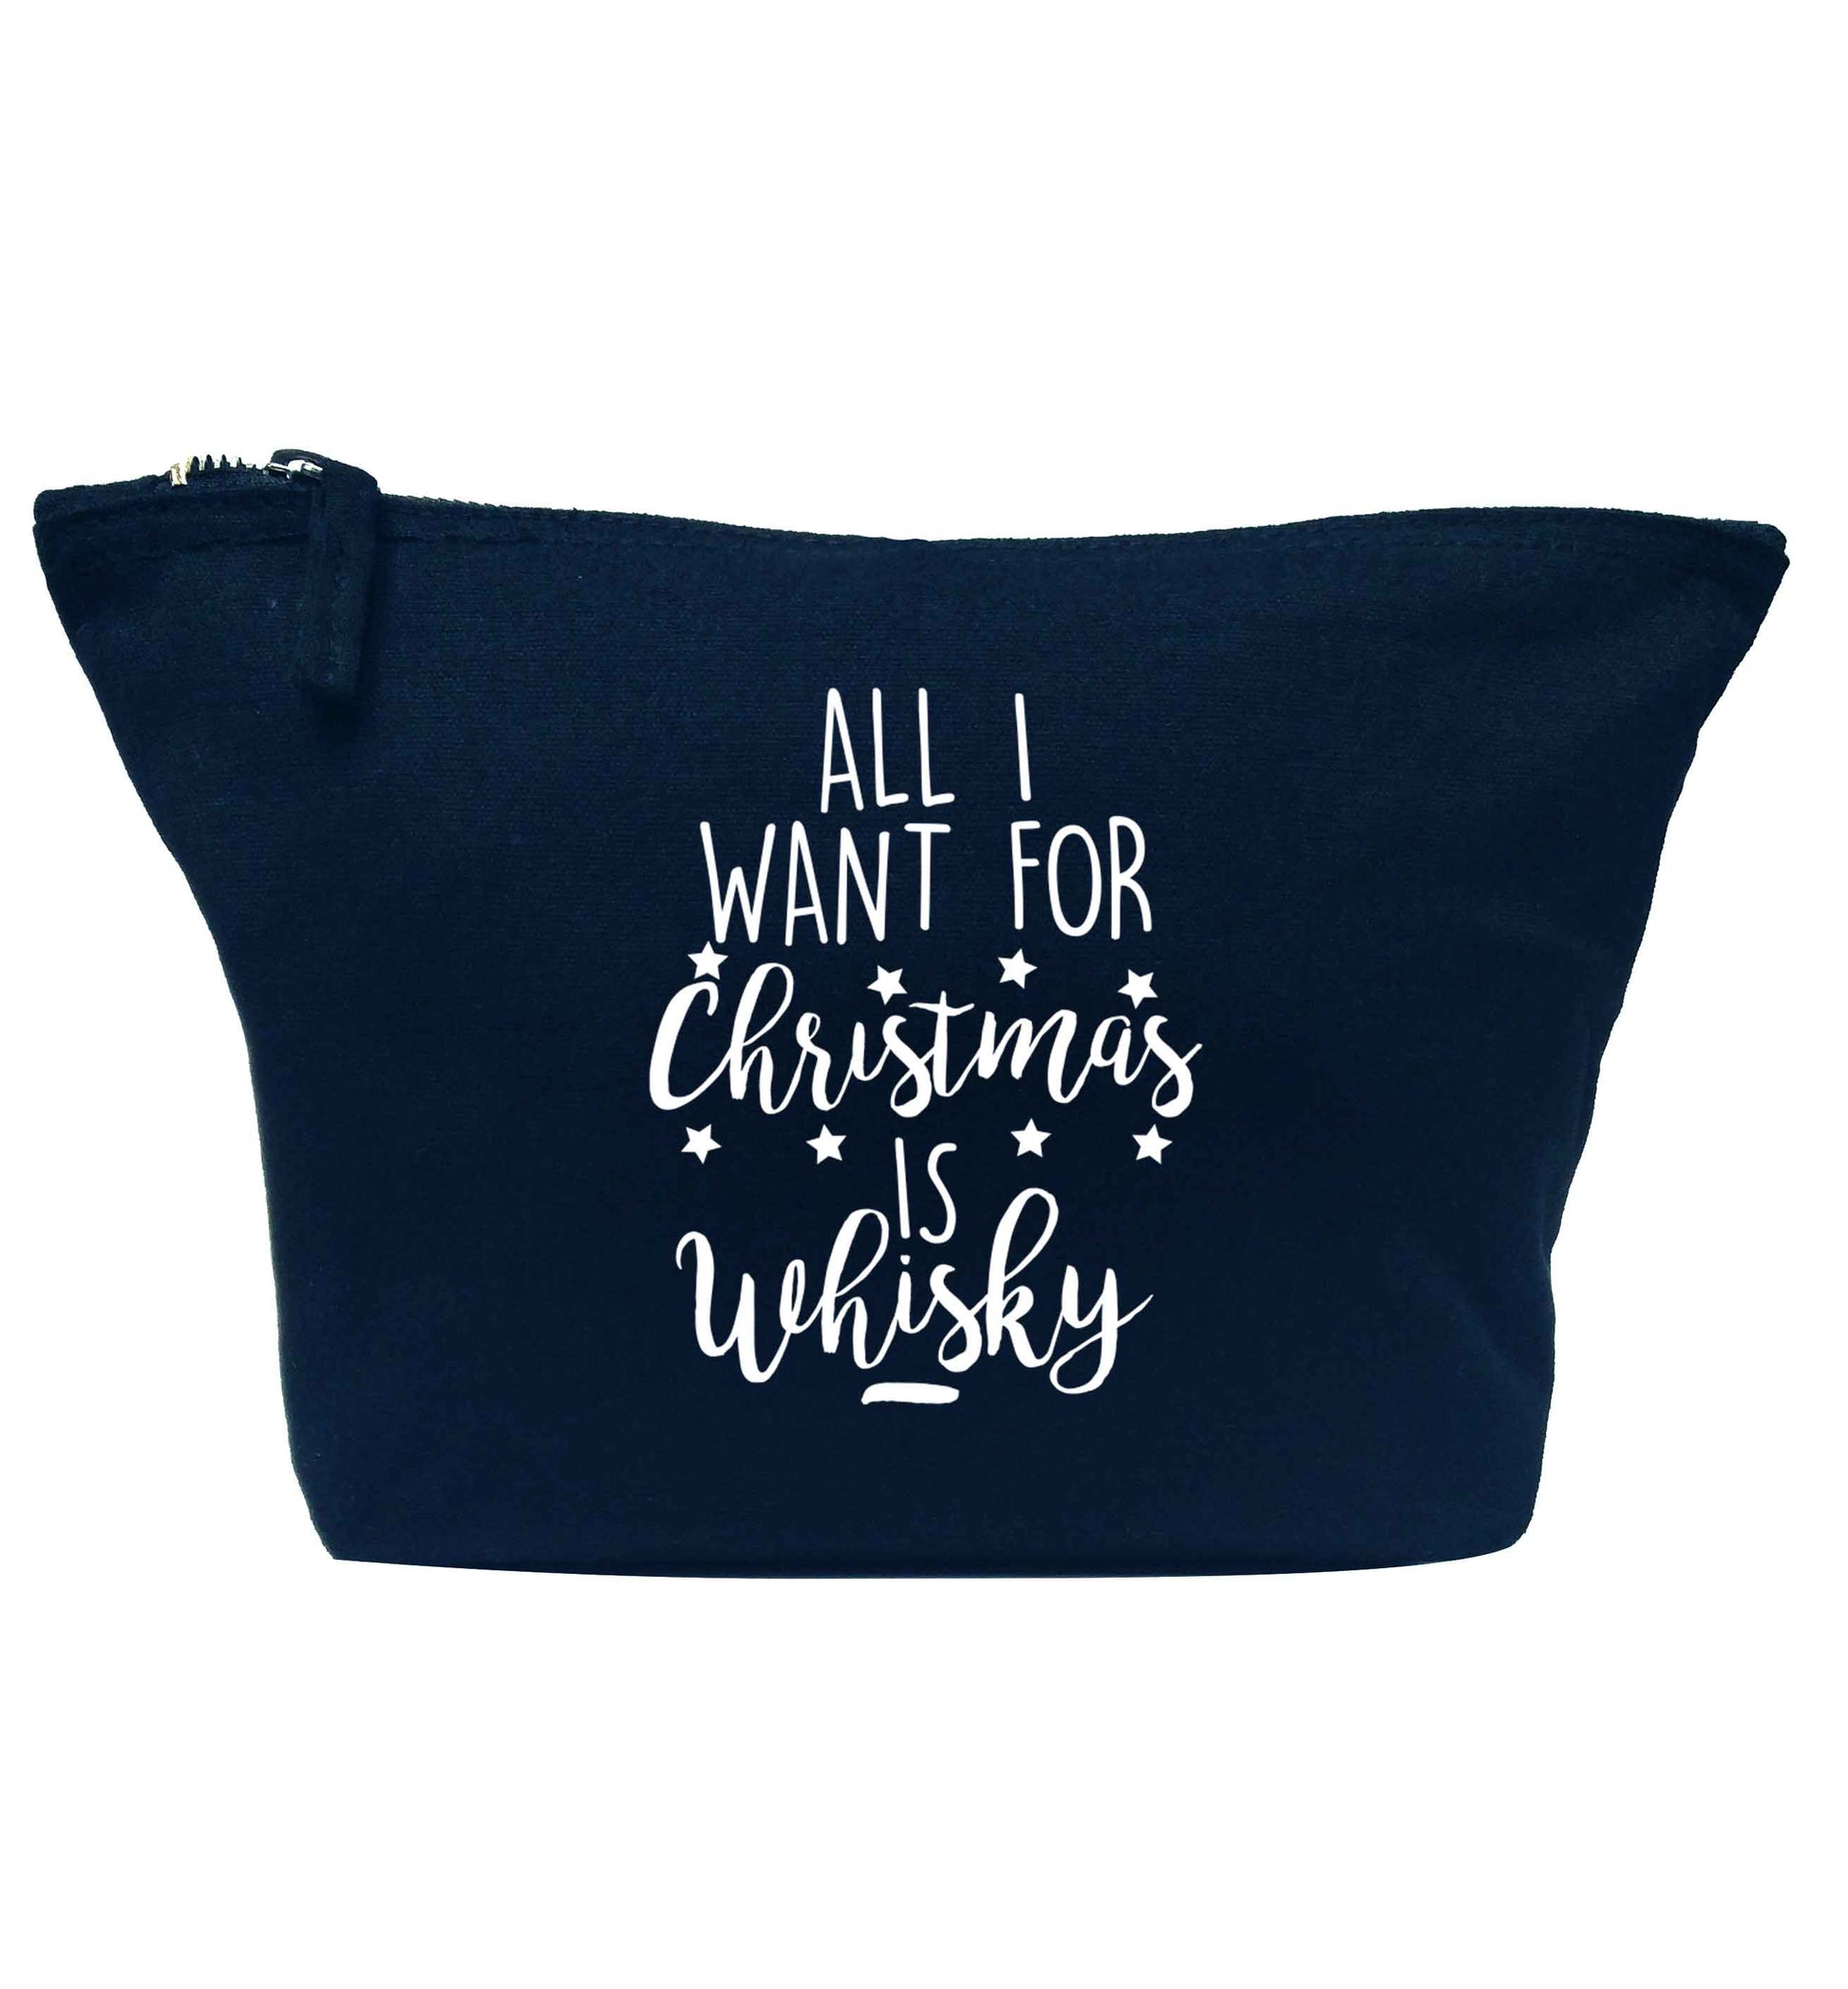 All I want for Christmas is whisky navy makeup bag